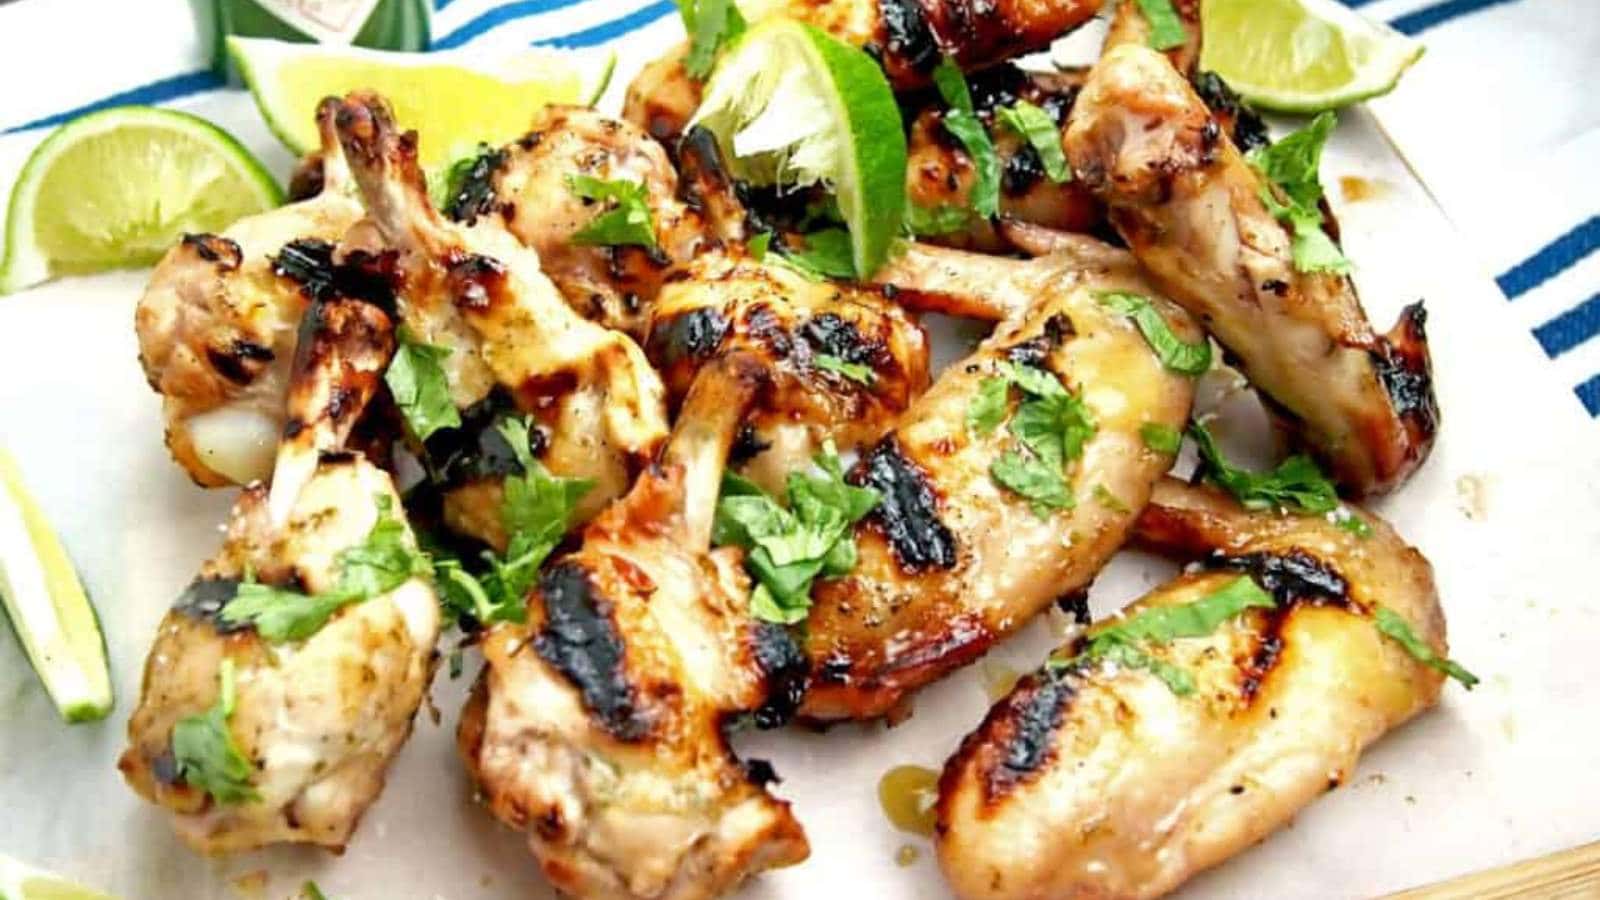 Grilled Margarita Wings recipe by A Grateful Meal.